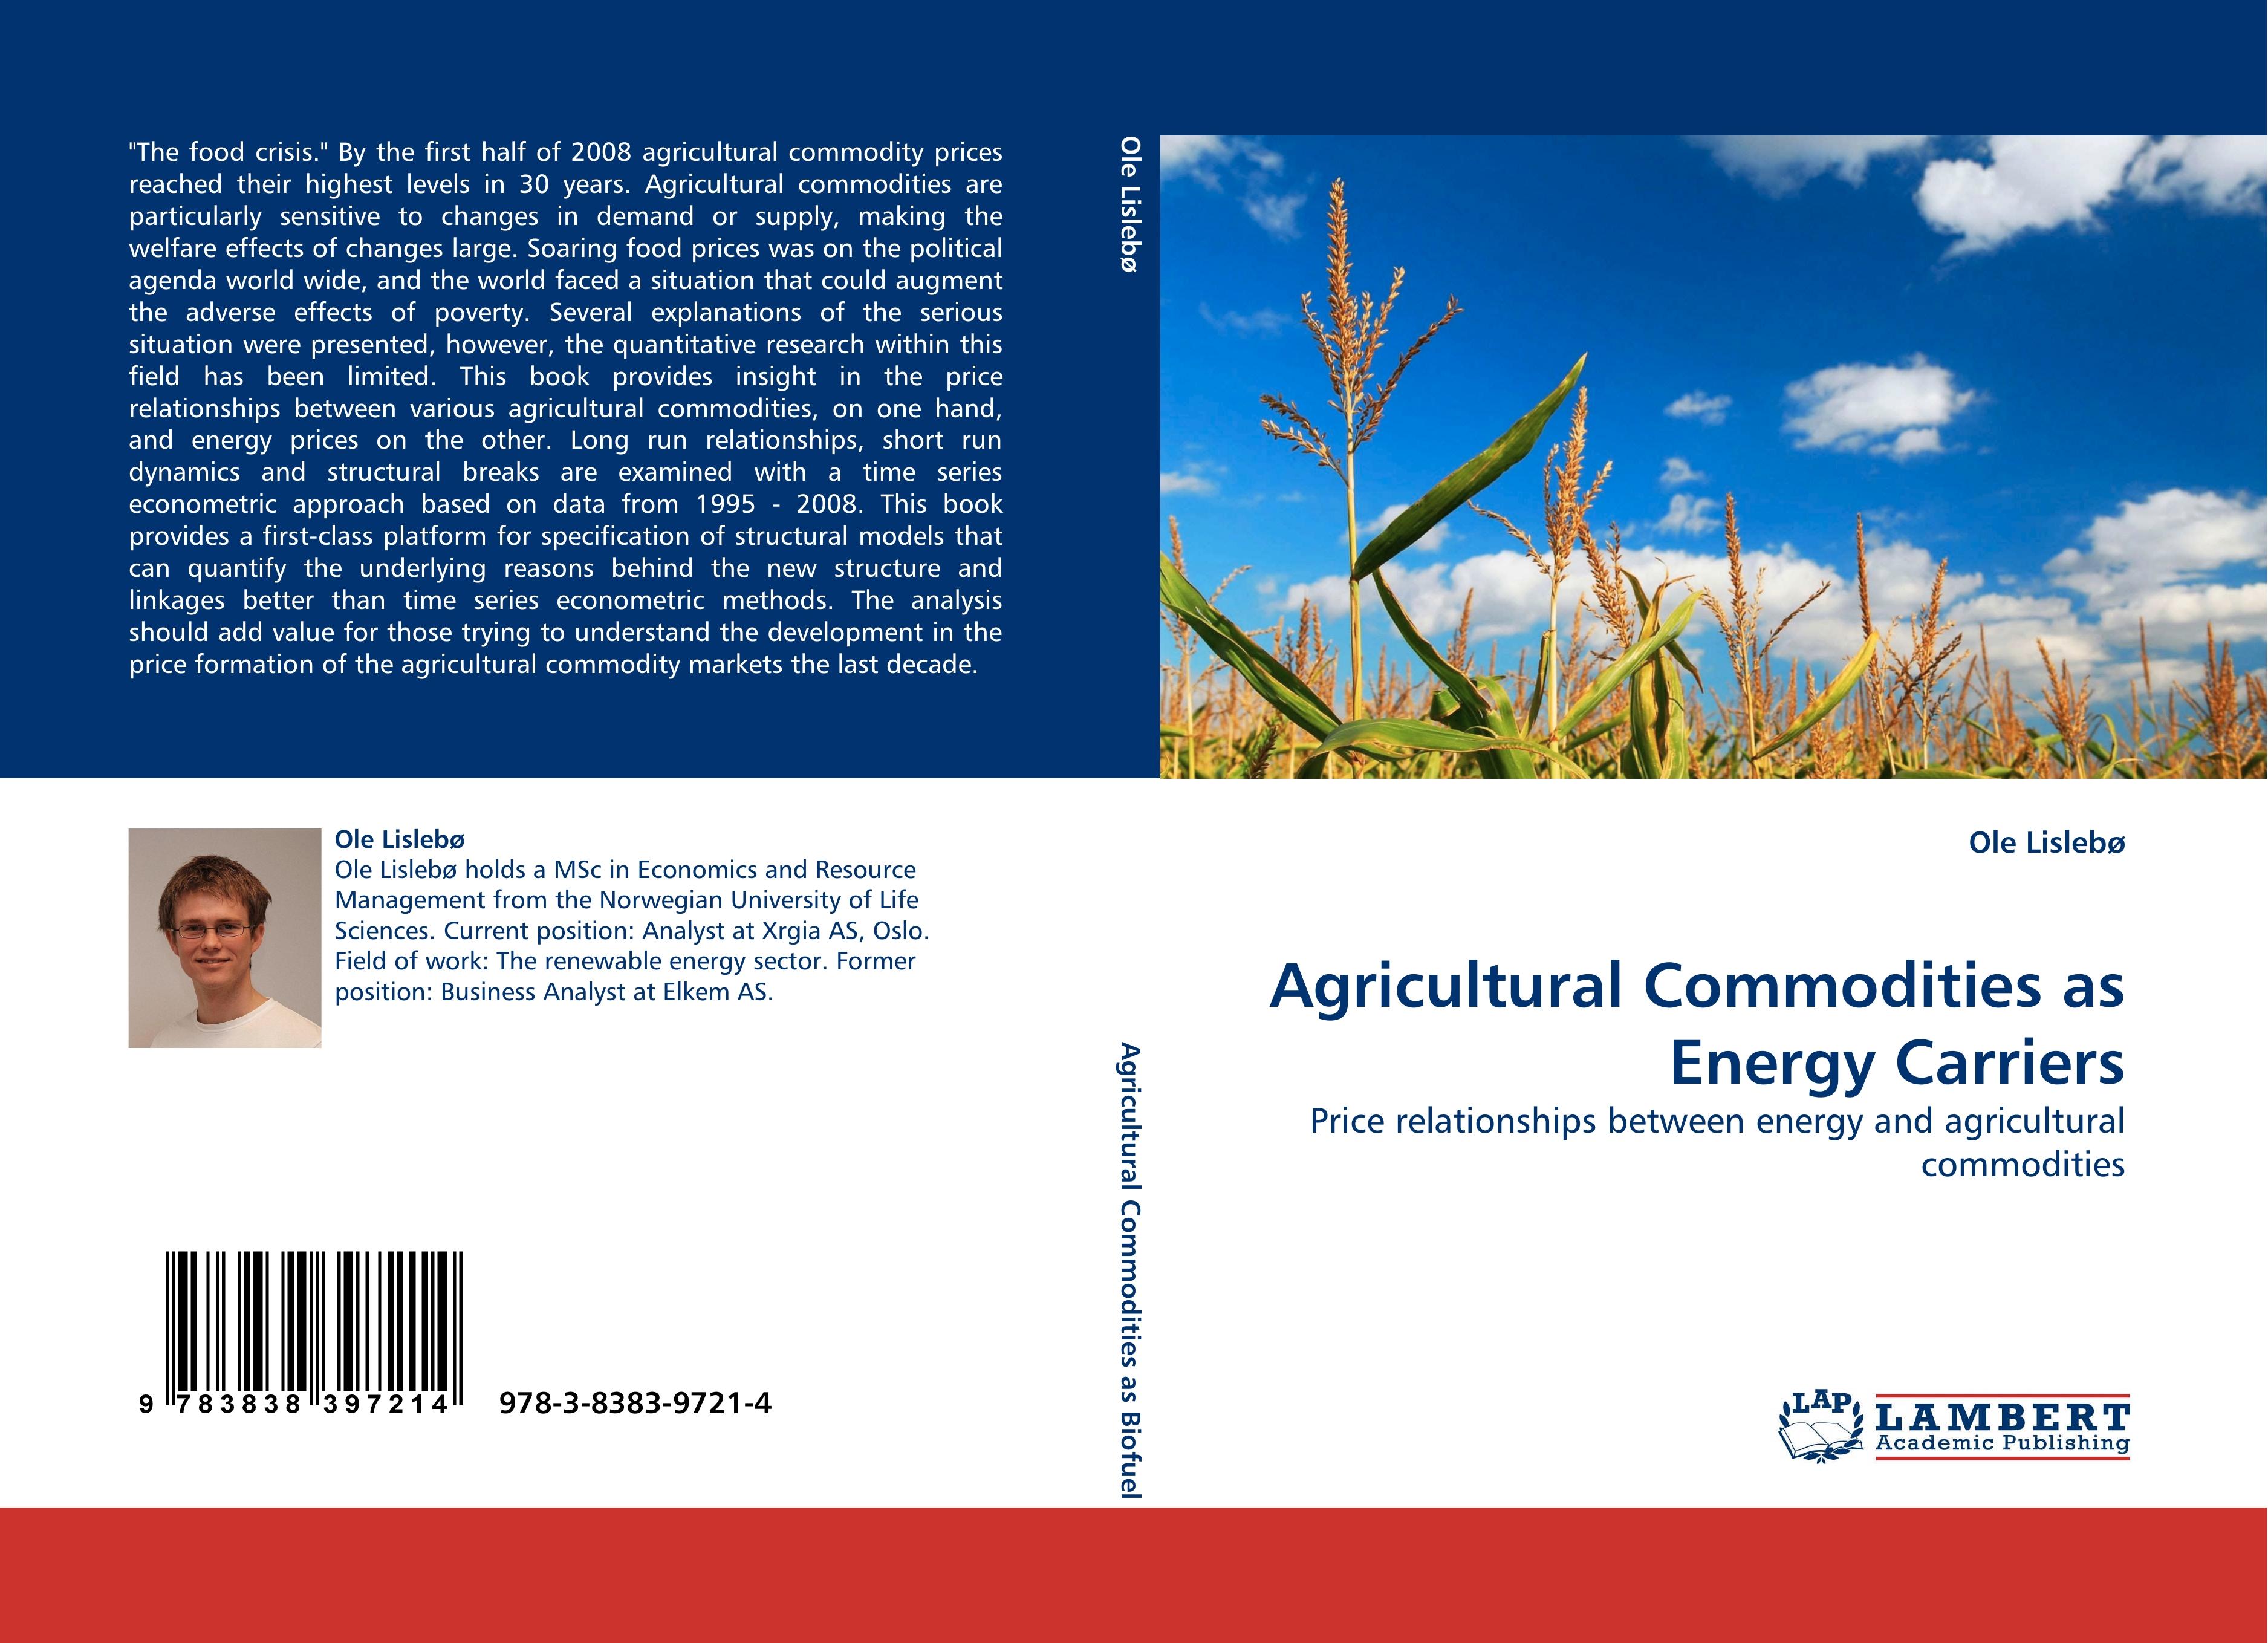 Agricultural Commodities as Energy Carriers / Price relationships between energy and agricultural commodities / Ole Lislebø / Taschenbuch / Paperback / 124 S. / Englisch / 2010 / EAN 9783838397214 - Lislebø, Ole